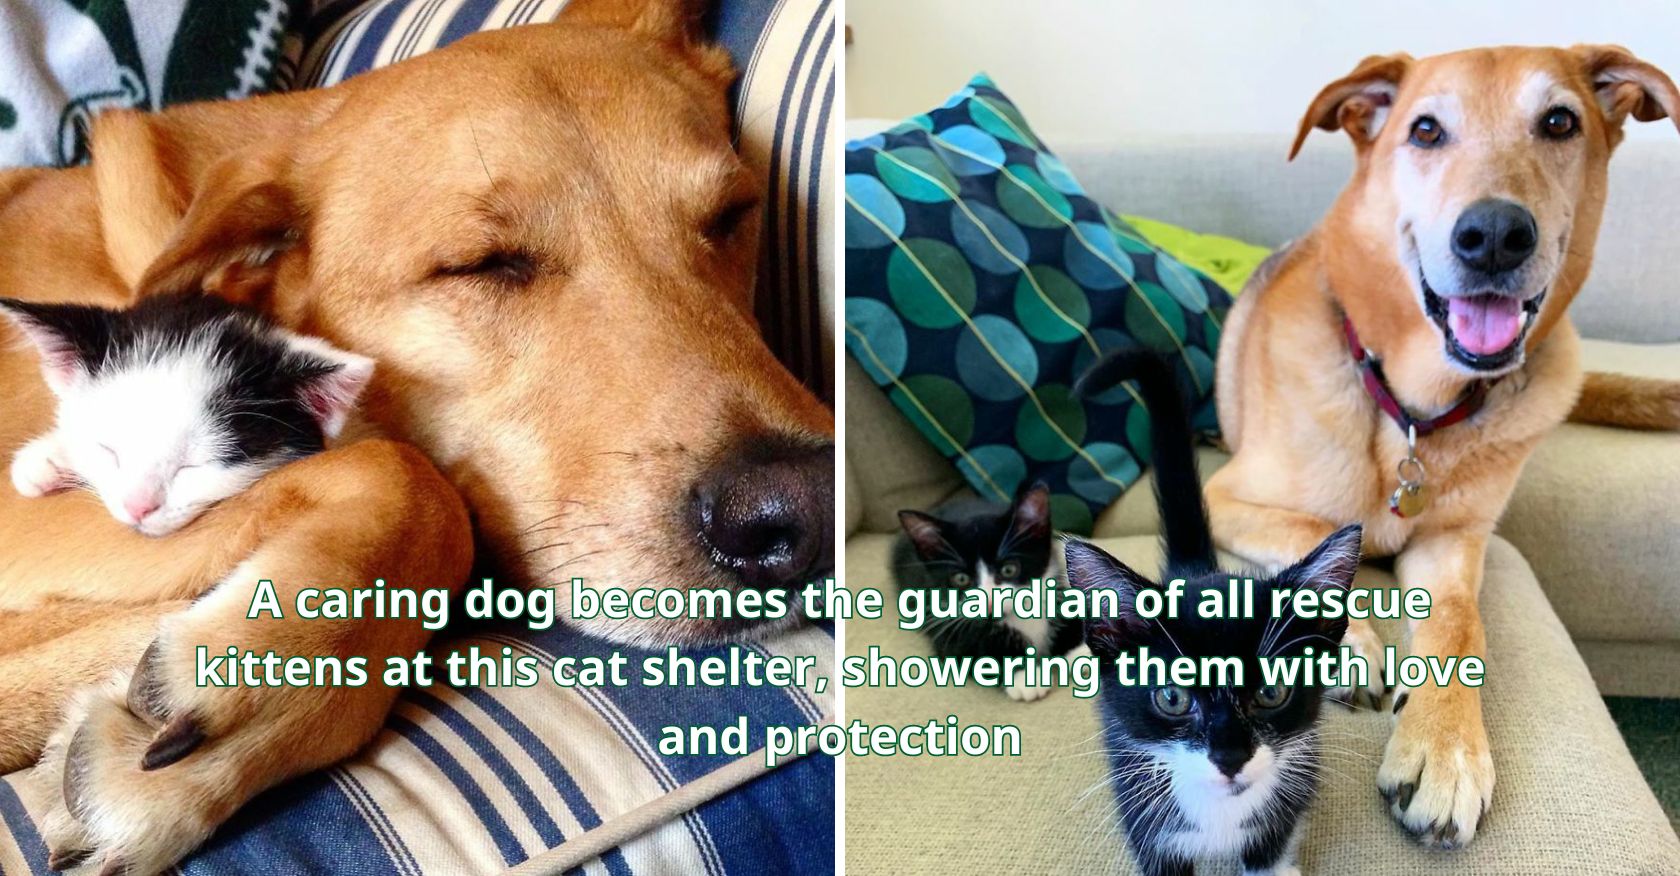 A caring dog becomes the guardian of all rescue kittens at this cat shelter, showering them with love and protection